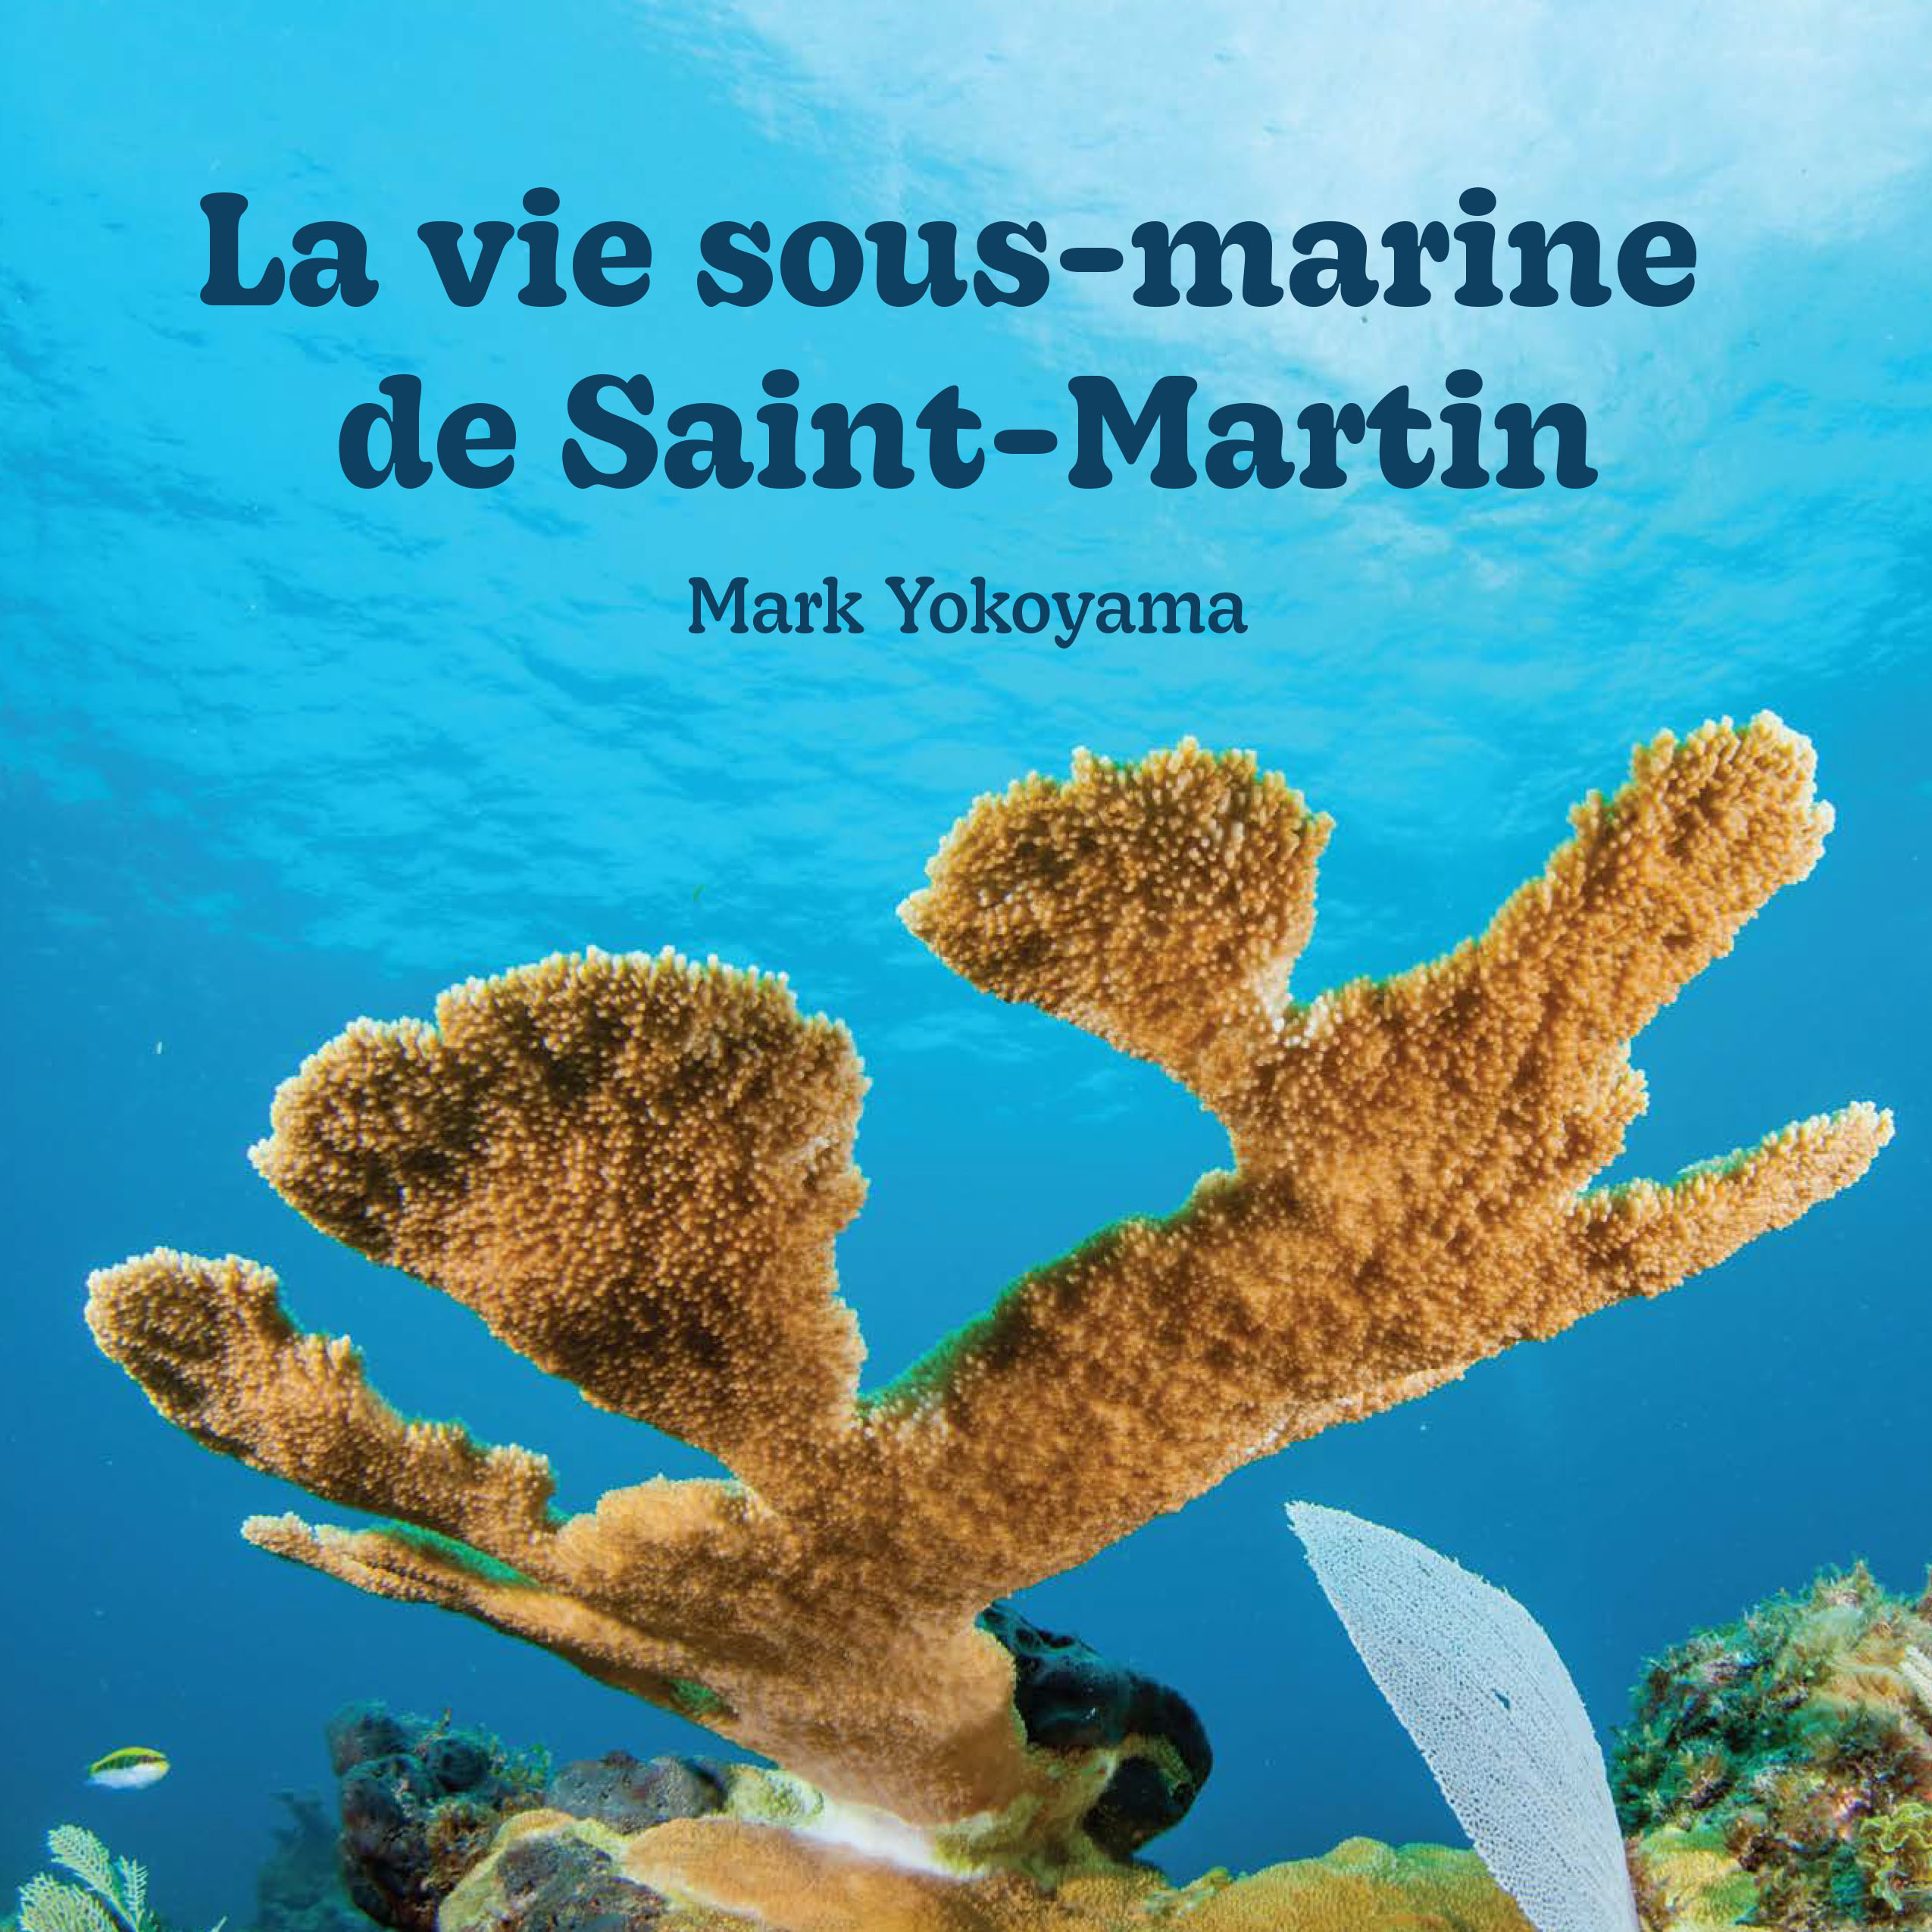 Book Launch Sea life on St. Martin